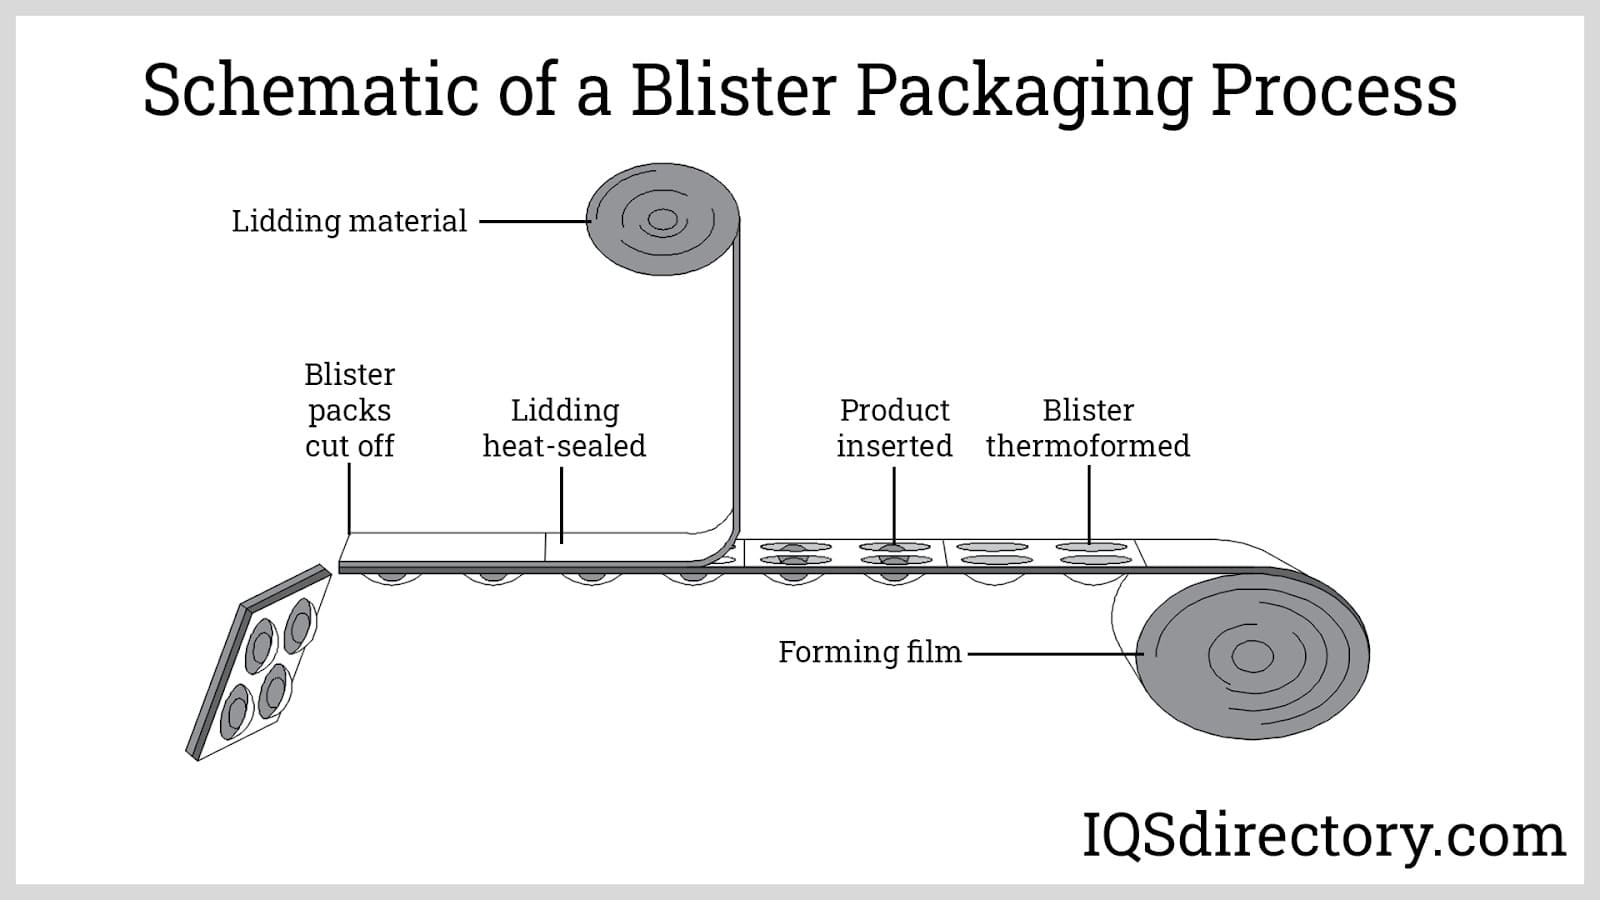 Schematic of a Blister Packaging Process